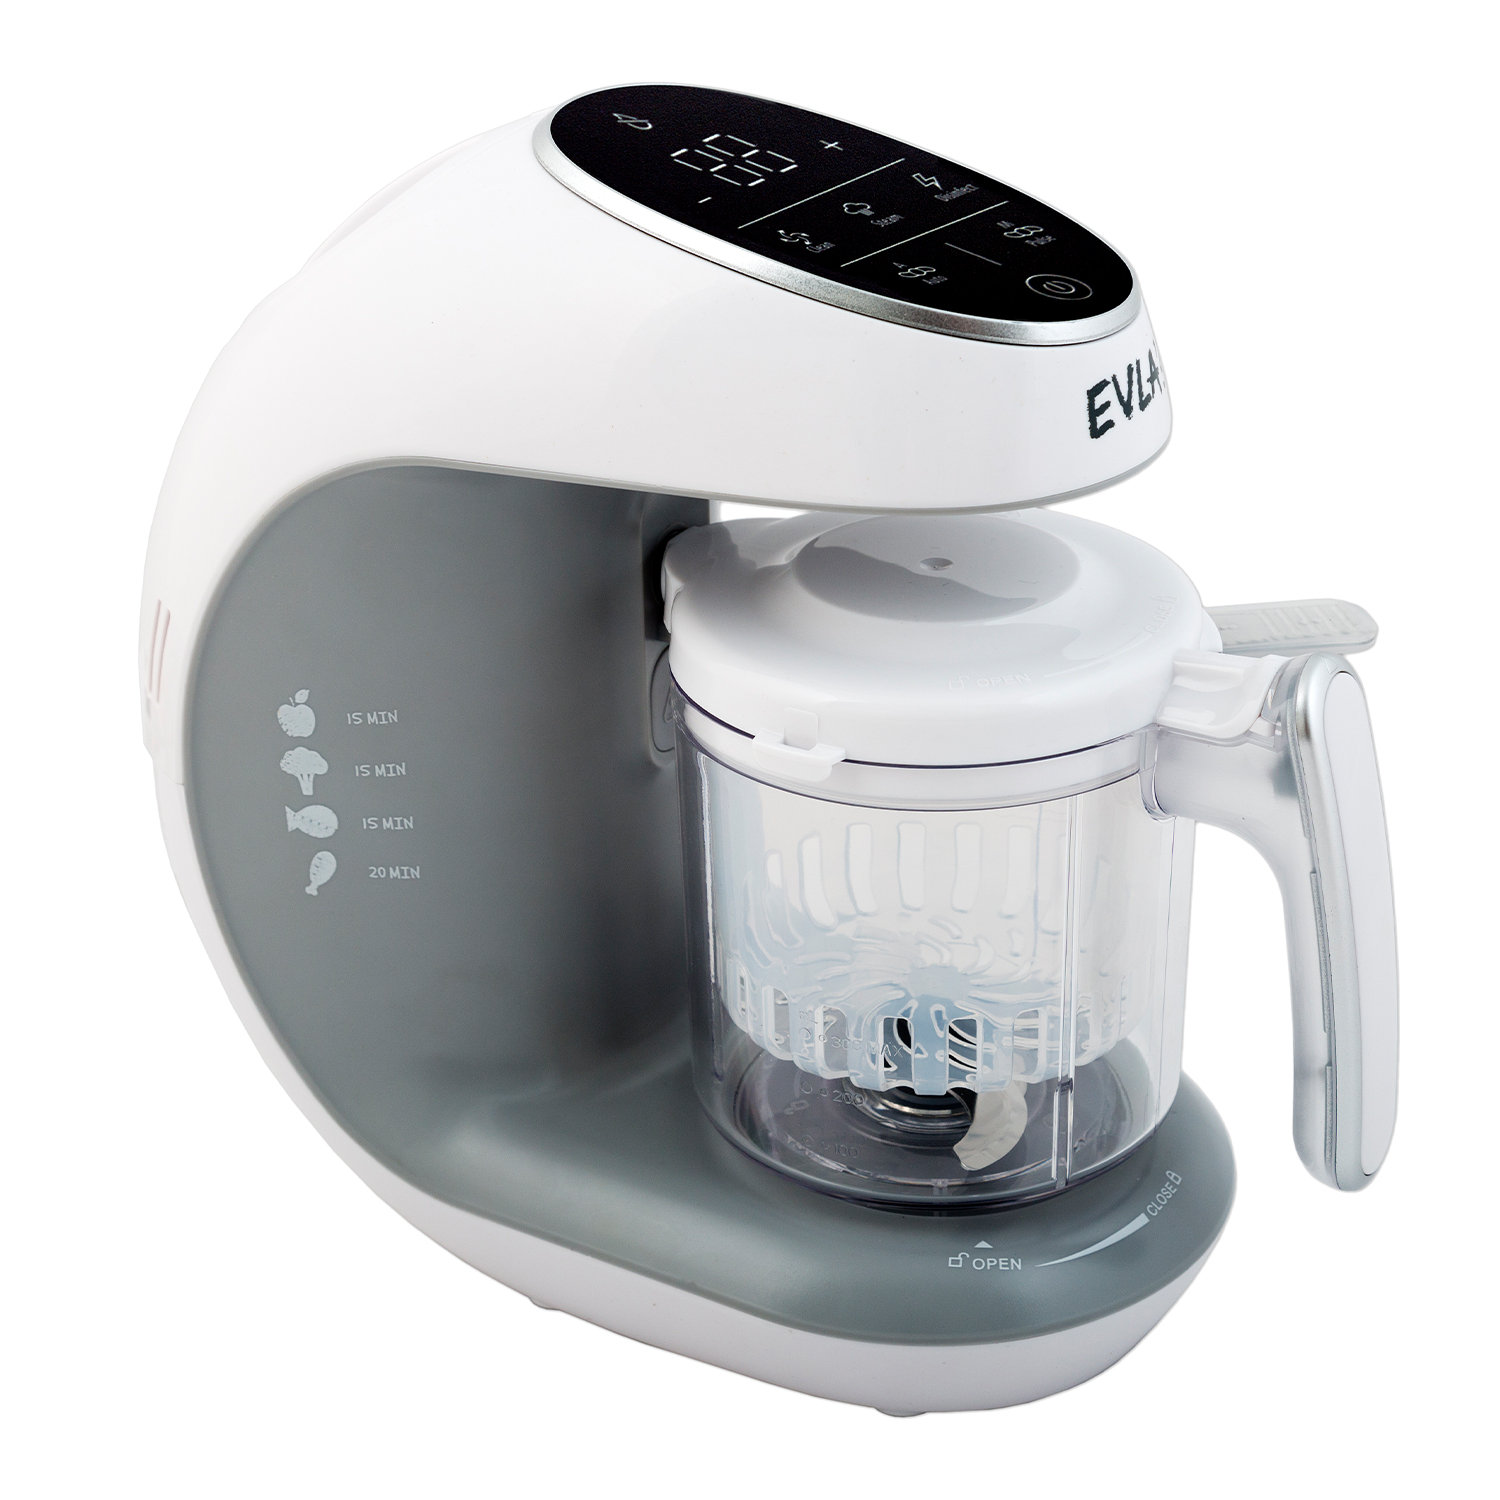 Nutribullet Baby, Baby Care System, Multi-Function High Speed